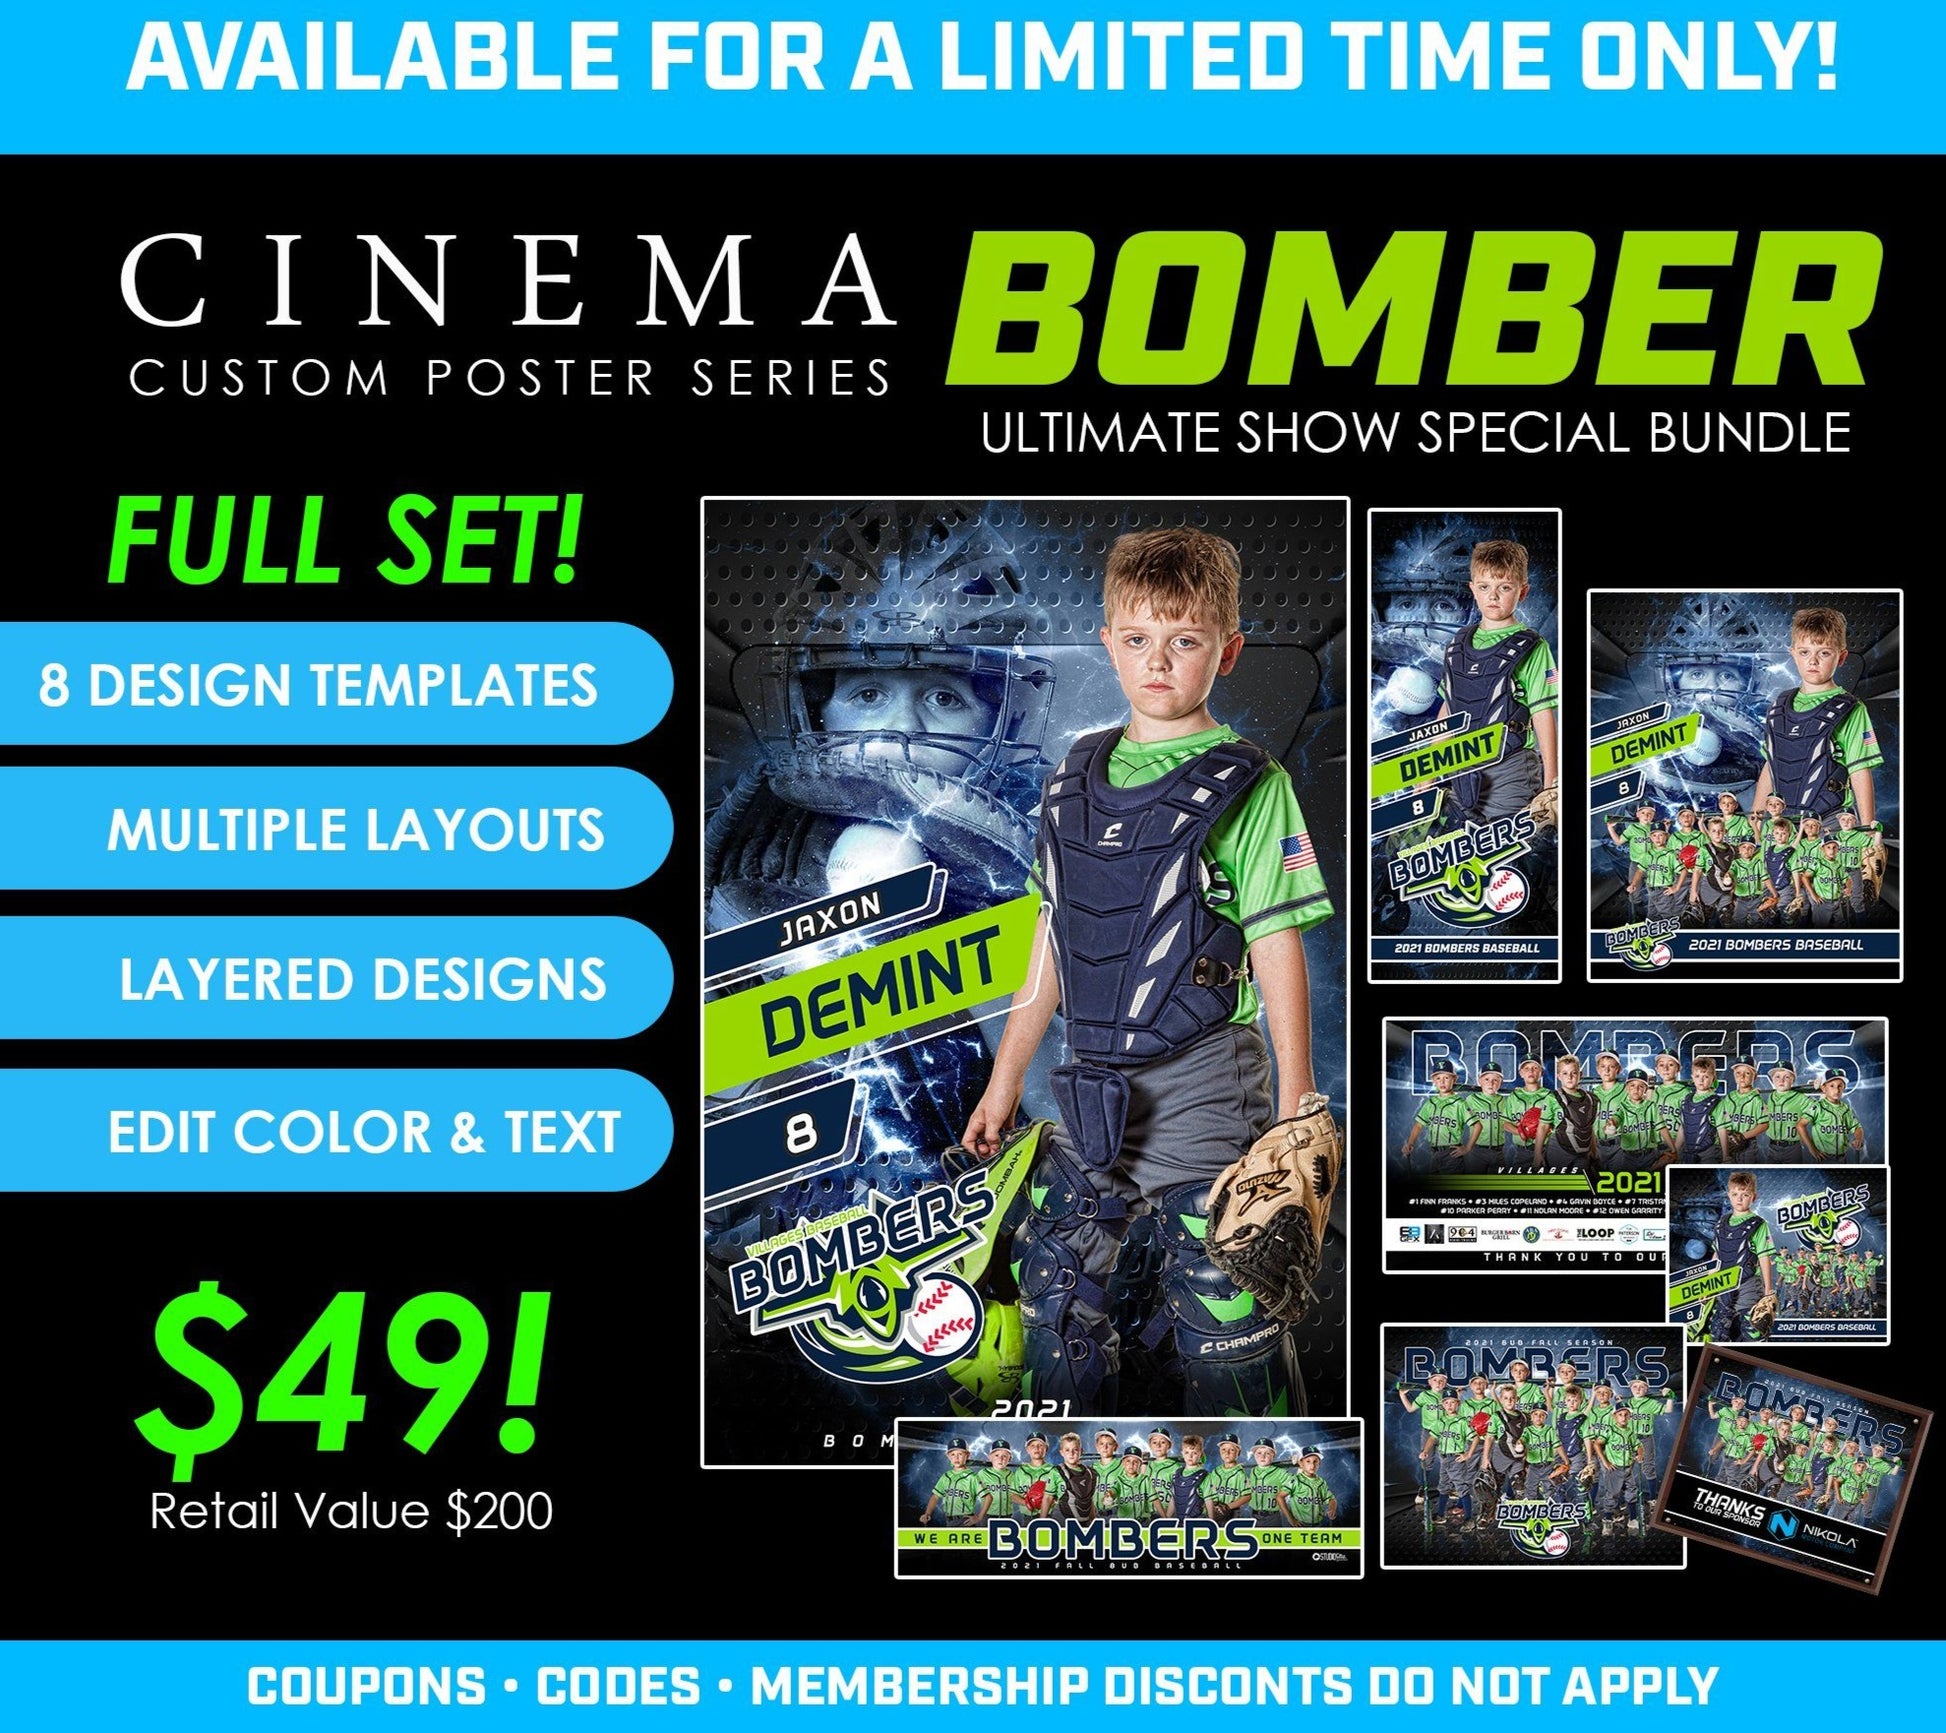 Cinema Series - BOMBER FULL SET - 2022 Limited Show Special Offer-Photoshop Template - PSMGraphix